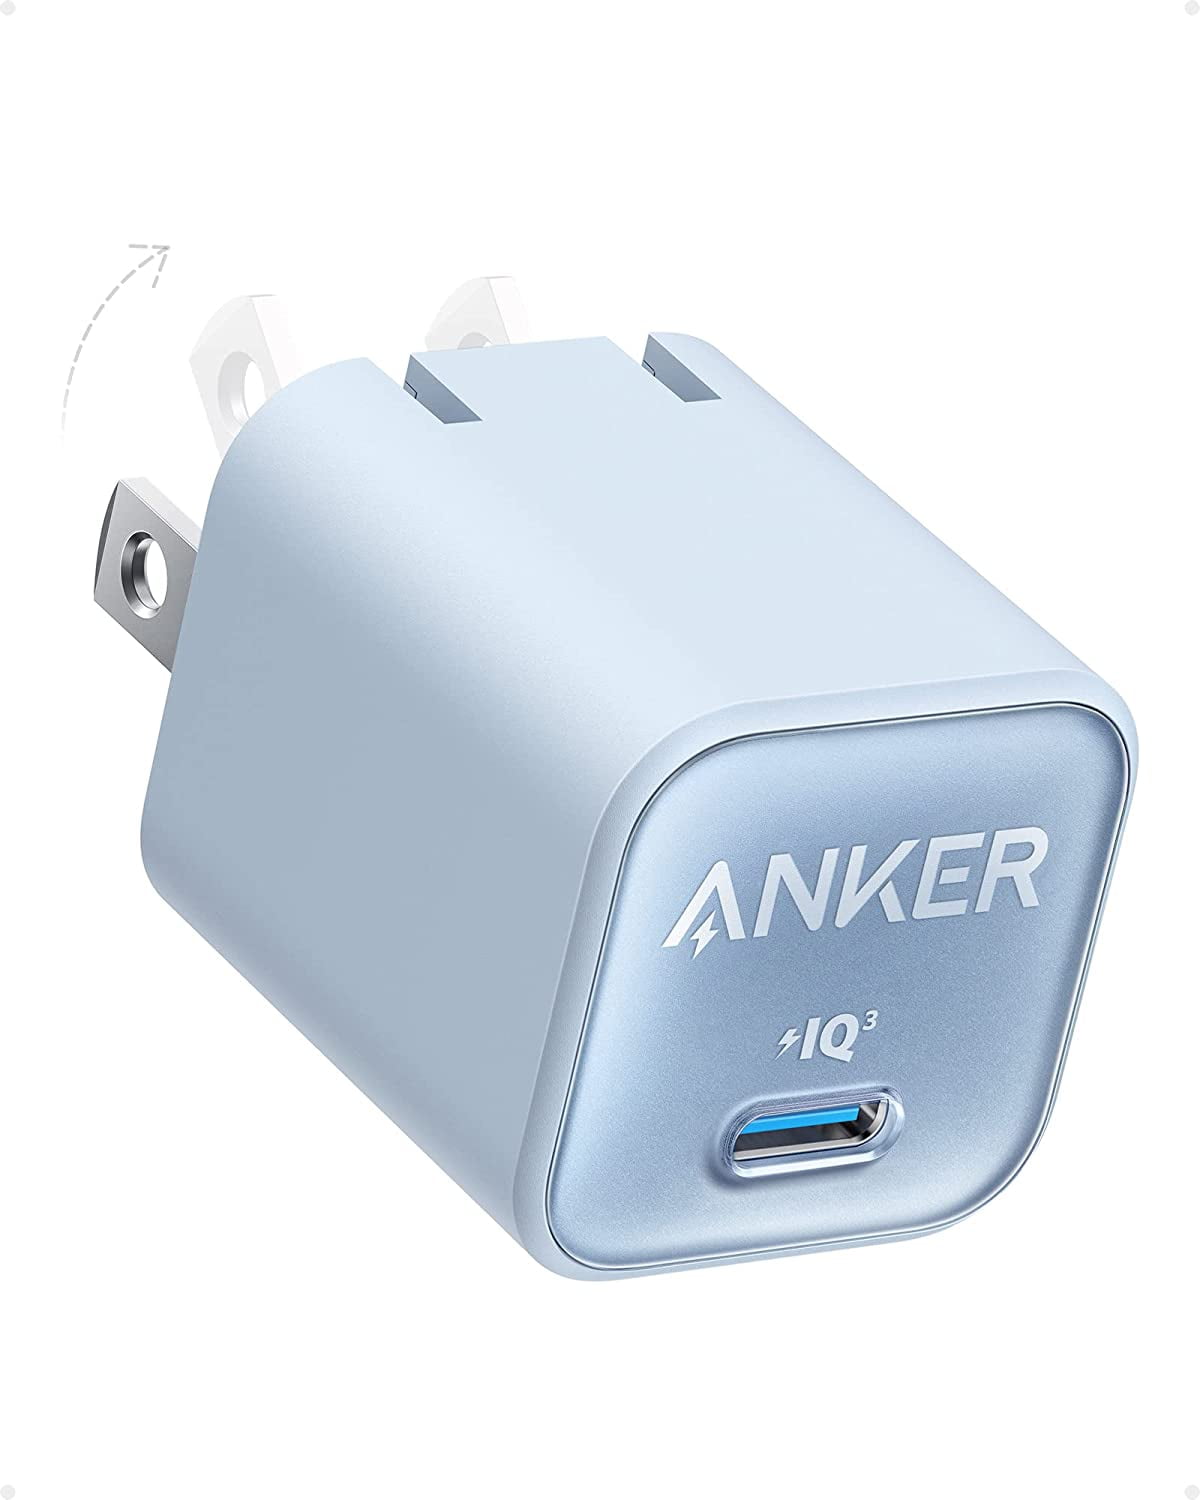 Anker USB C Charger, 20W Fast Charger with Foldable Plug